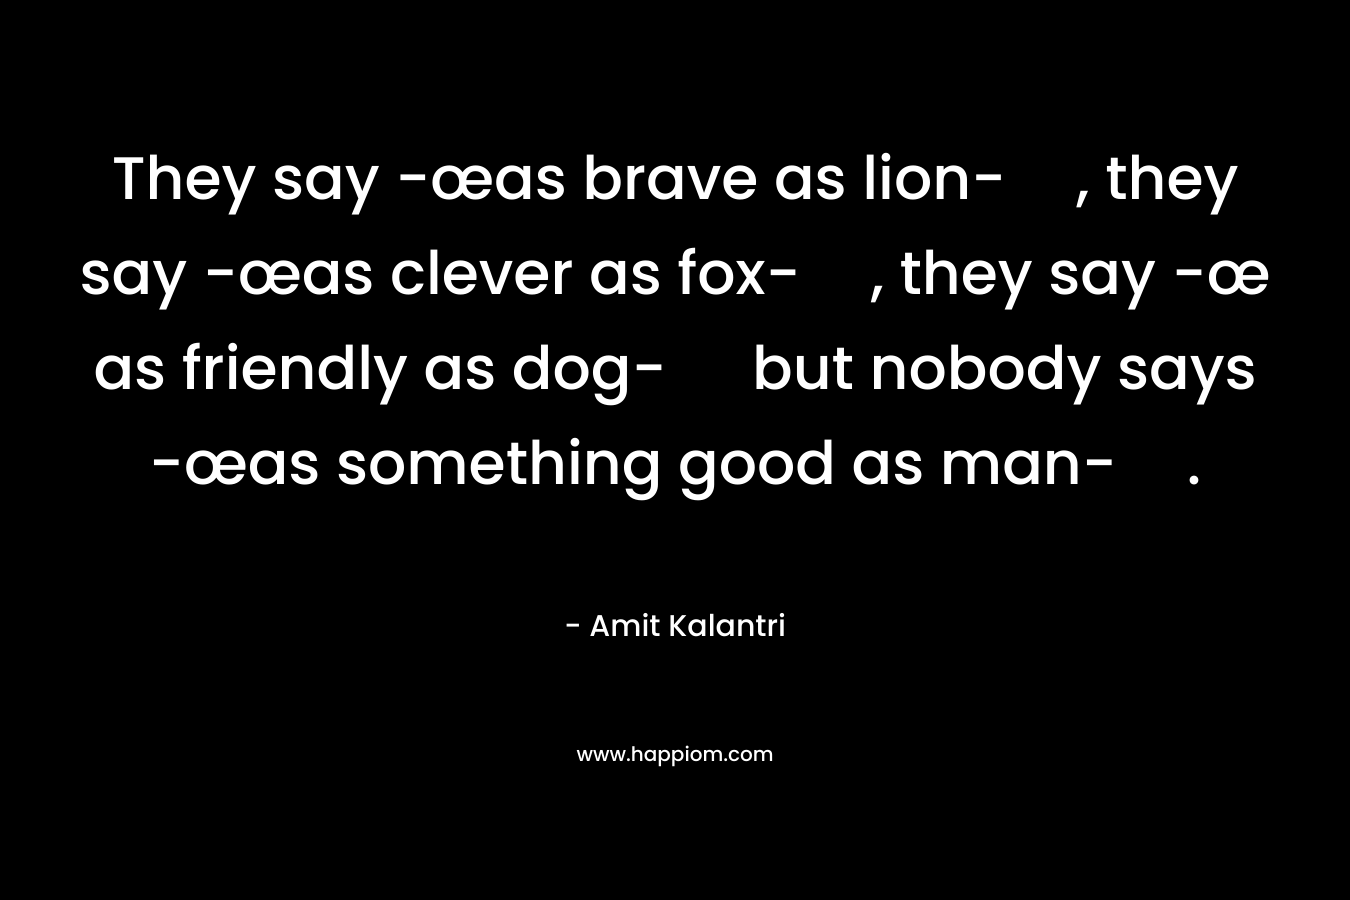 They say -œas brave as lion-, they say -œas clever as fox-, they say -œ as friendly as dog- but nobody says -œas something good as man-.